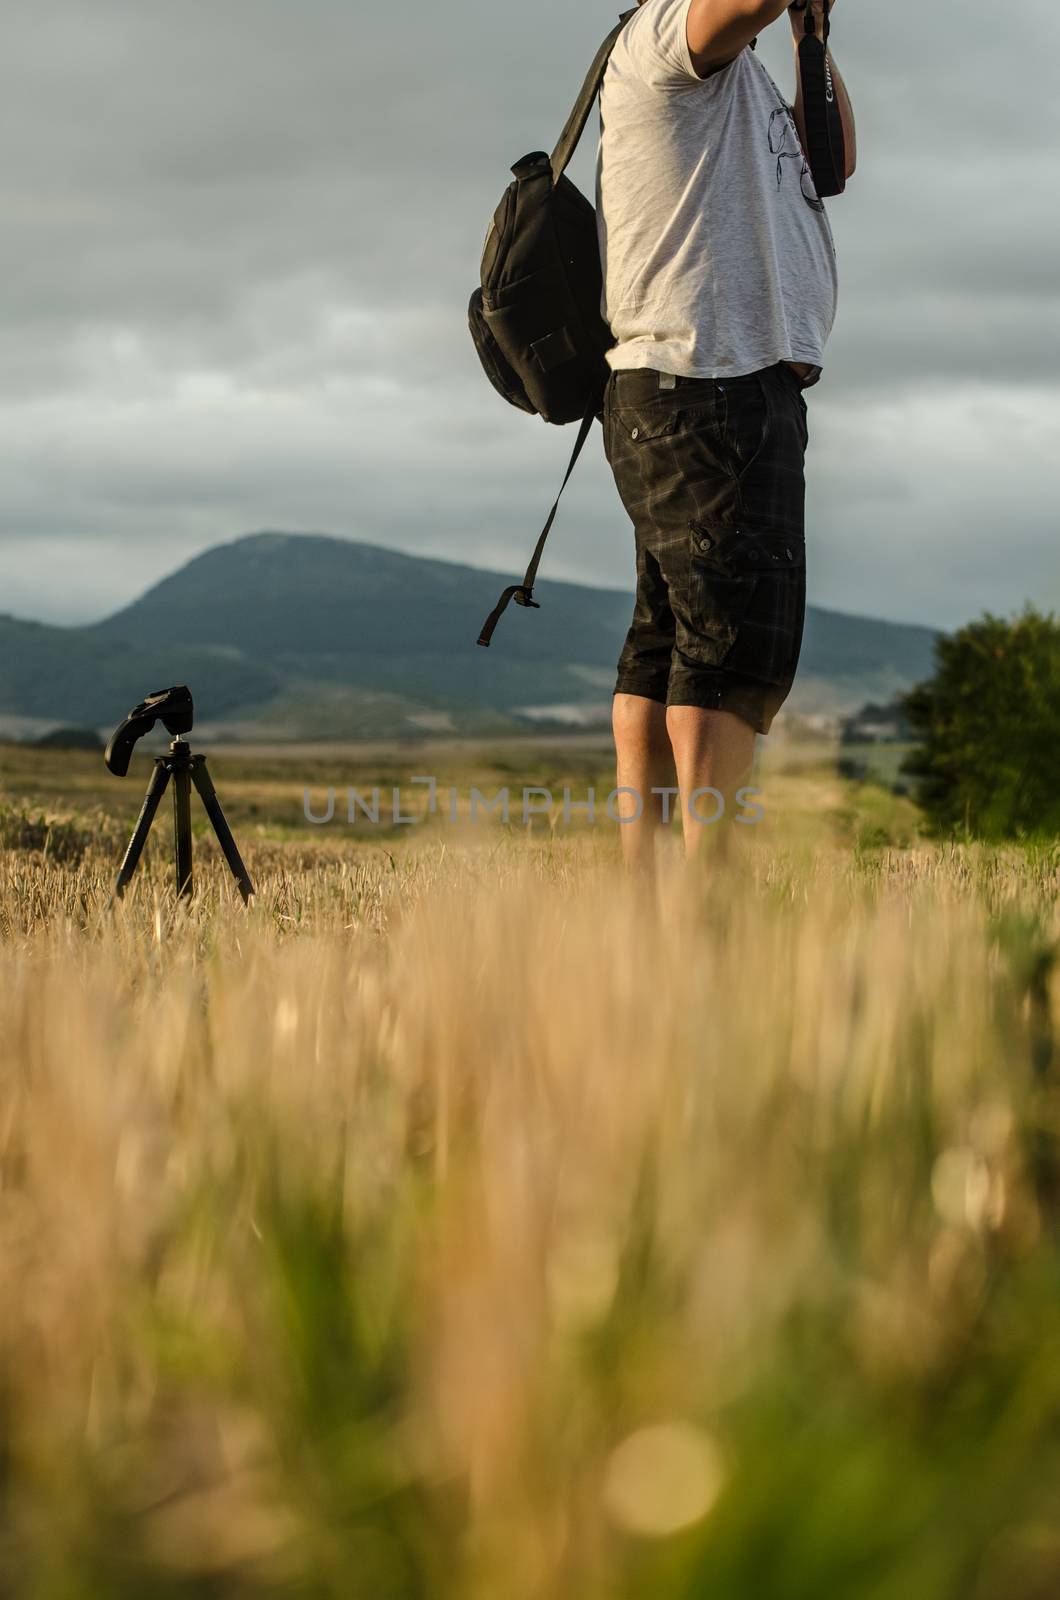 Amateur photographer in actions with his tripod at the side. Pam by mikelju